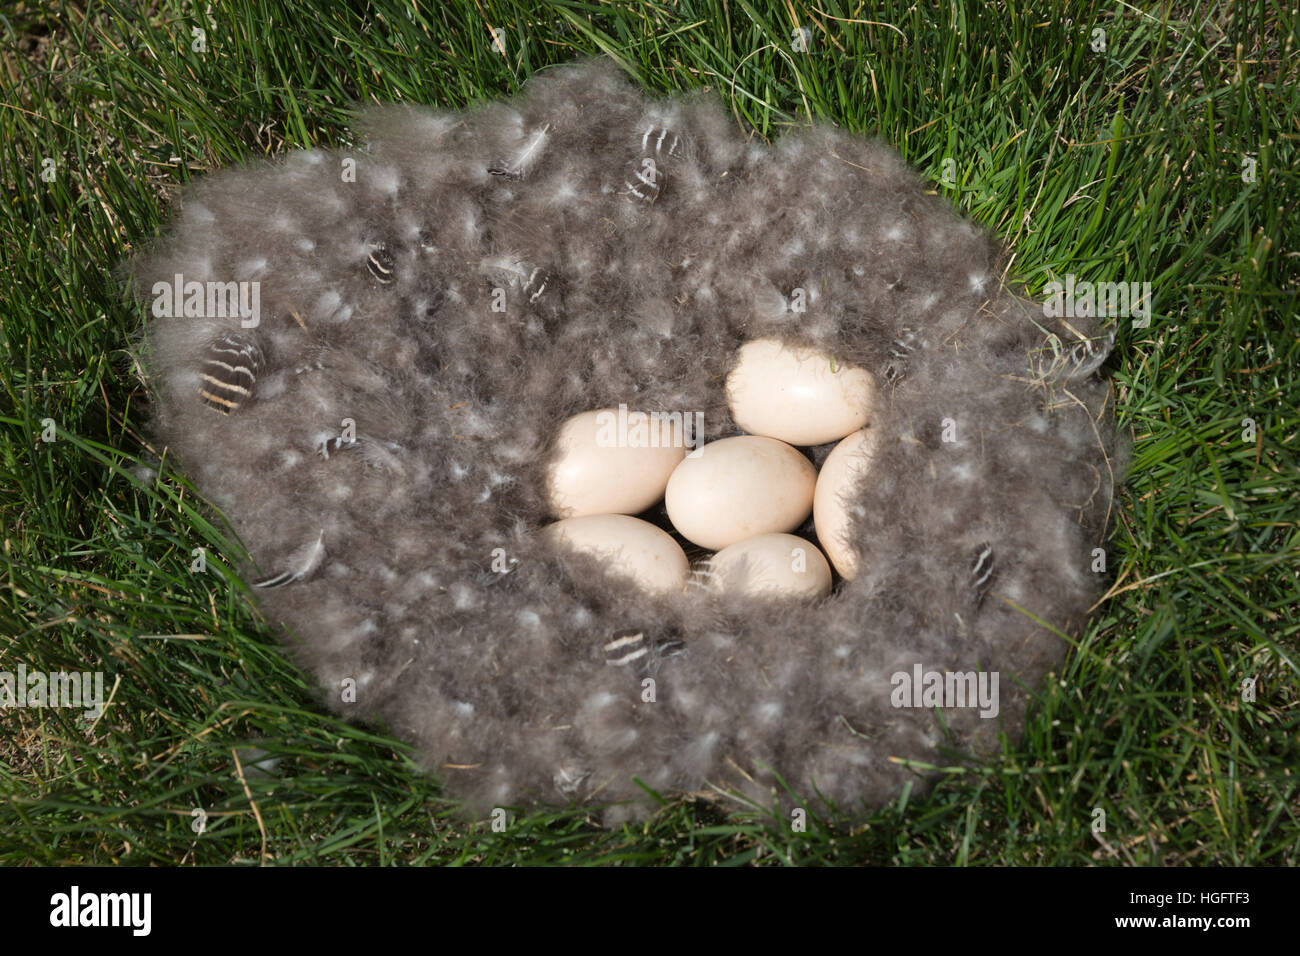 Birds eggs in nest, Patagonia, Argentina, South America Stock Photo